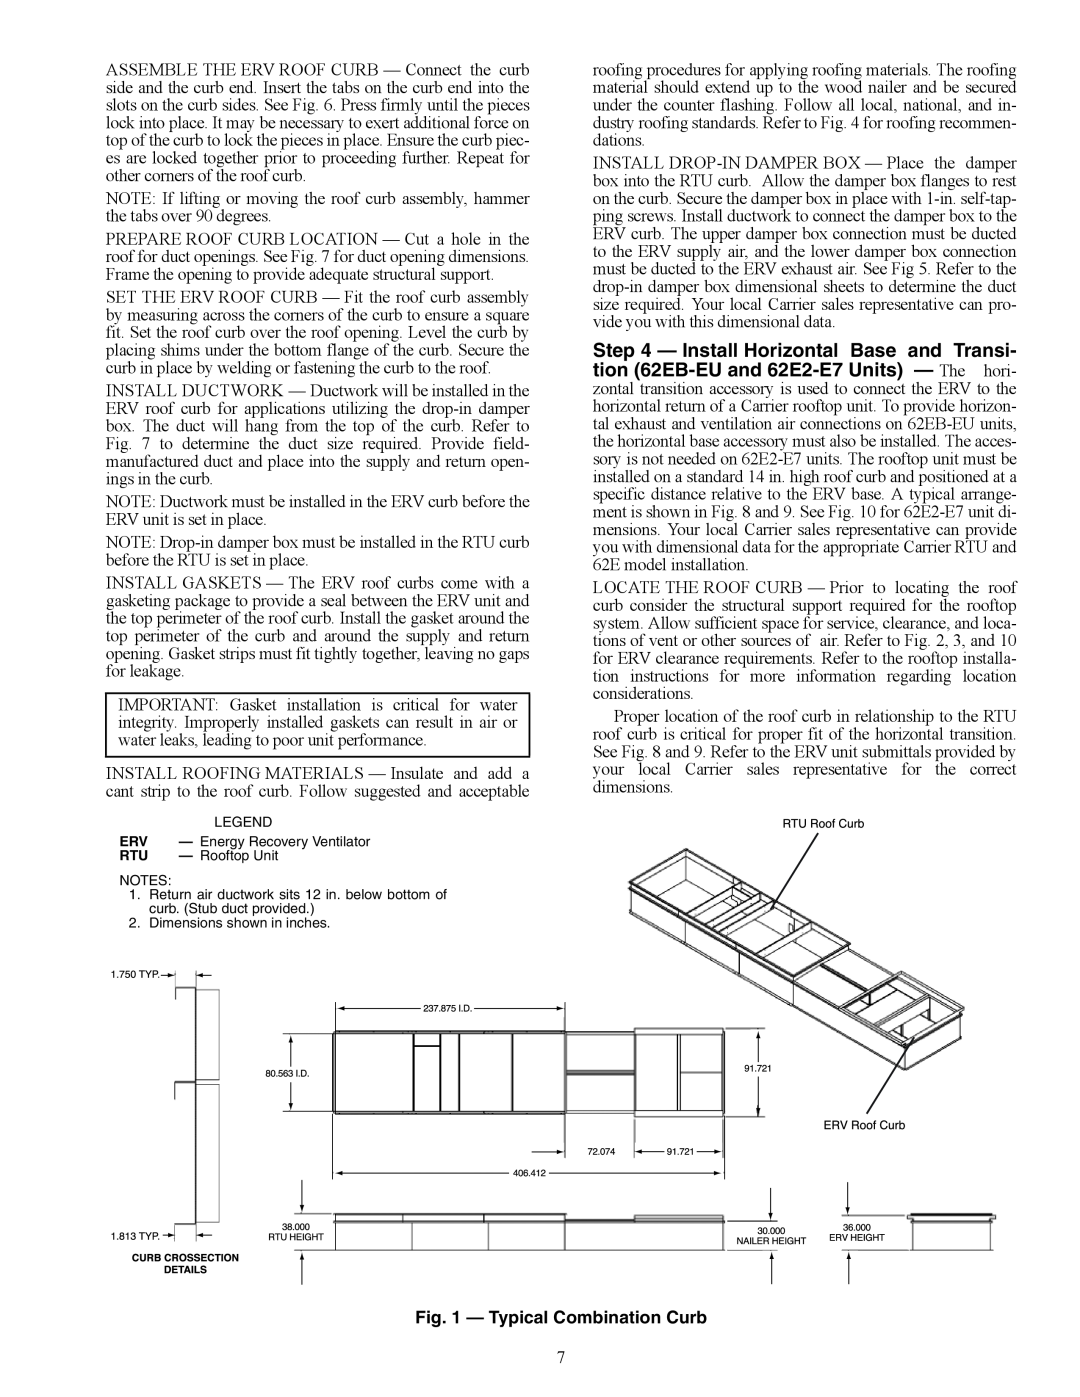 Carrier 62E specifications Typical Combination Curb 